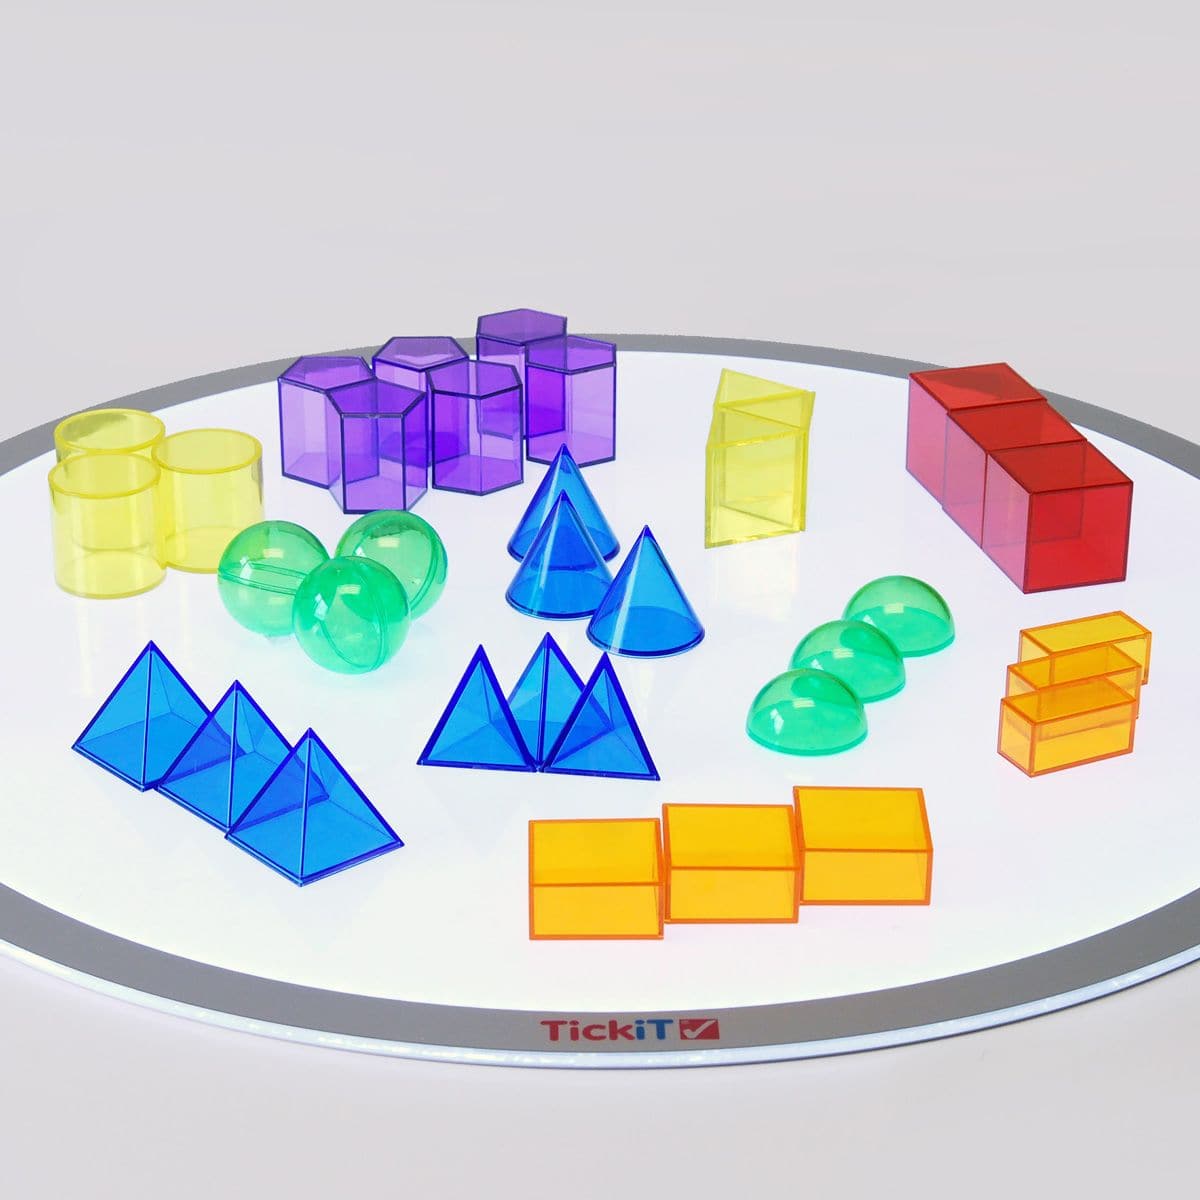 Translucent Geometric Shapes, The Translucent Geometric Shapes are a pack of 12 different shapes and 6 colours. The Translucent Geometric Shapes are ideal for learning shape names and attributes using a light panel. Translucent Geometric Shapes come in a convenient storage container perfect for storing away after use. Introduce a new dimension to your educational or playtime activities with the Translucent Geometric Shapes pack. Comprising 12 different shapes in 6 vibrant colours, this set brings learning t